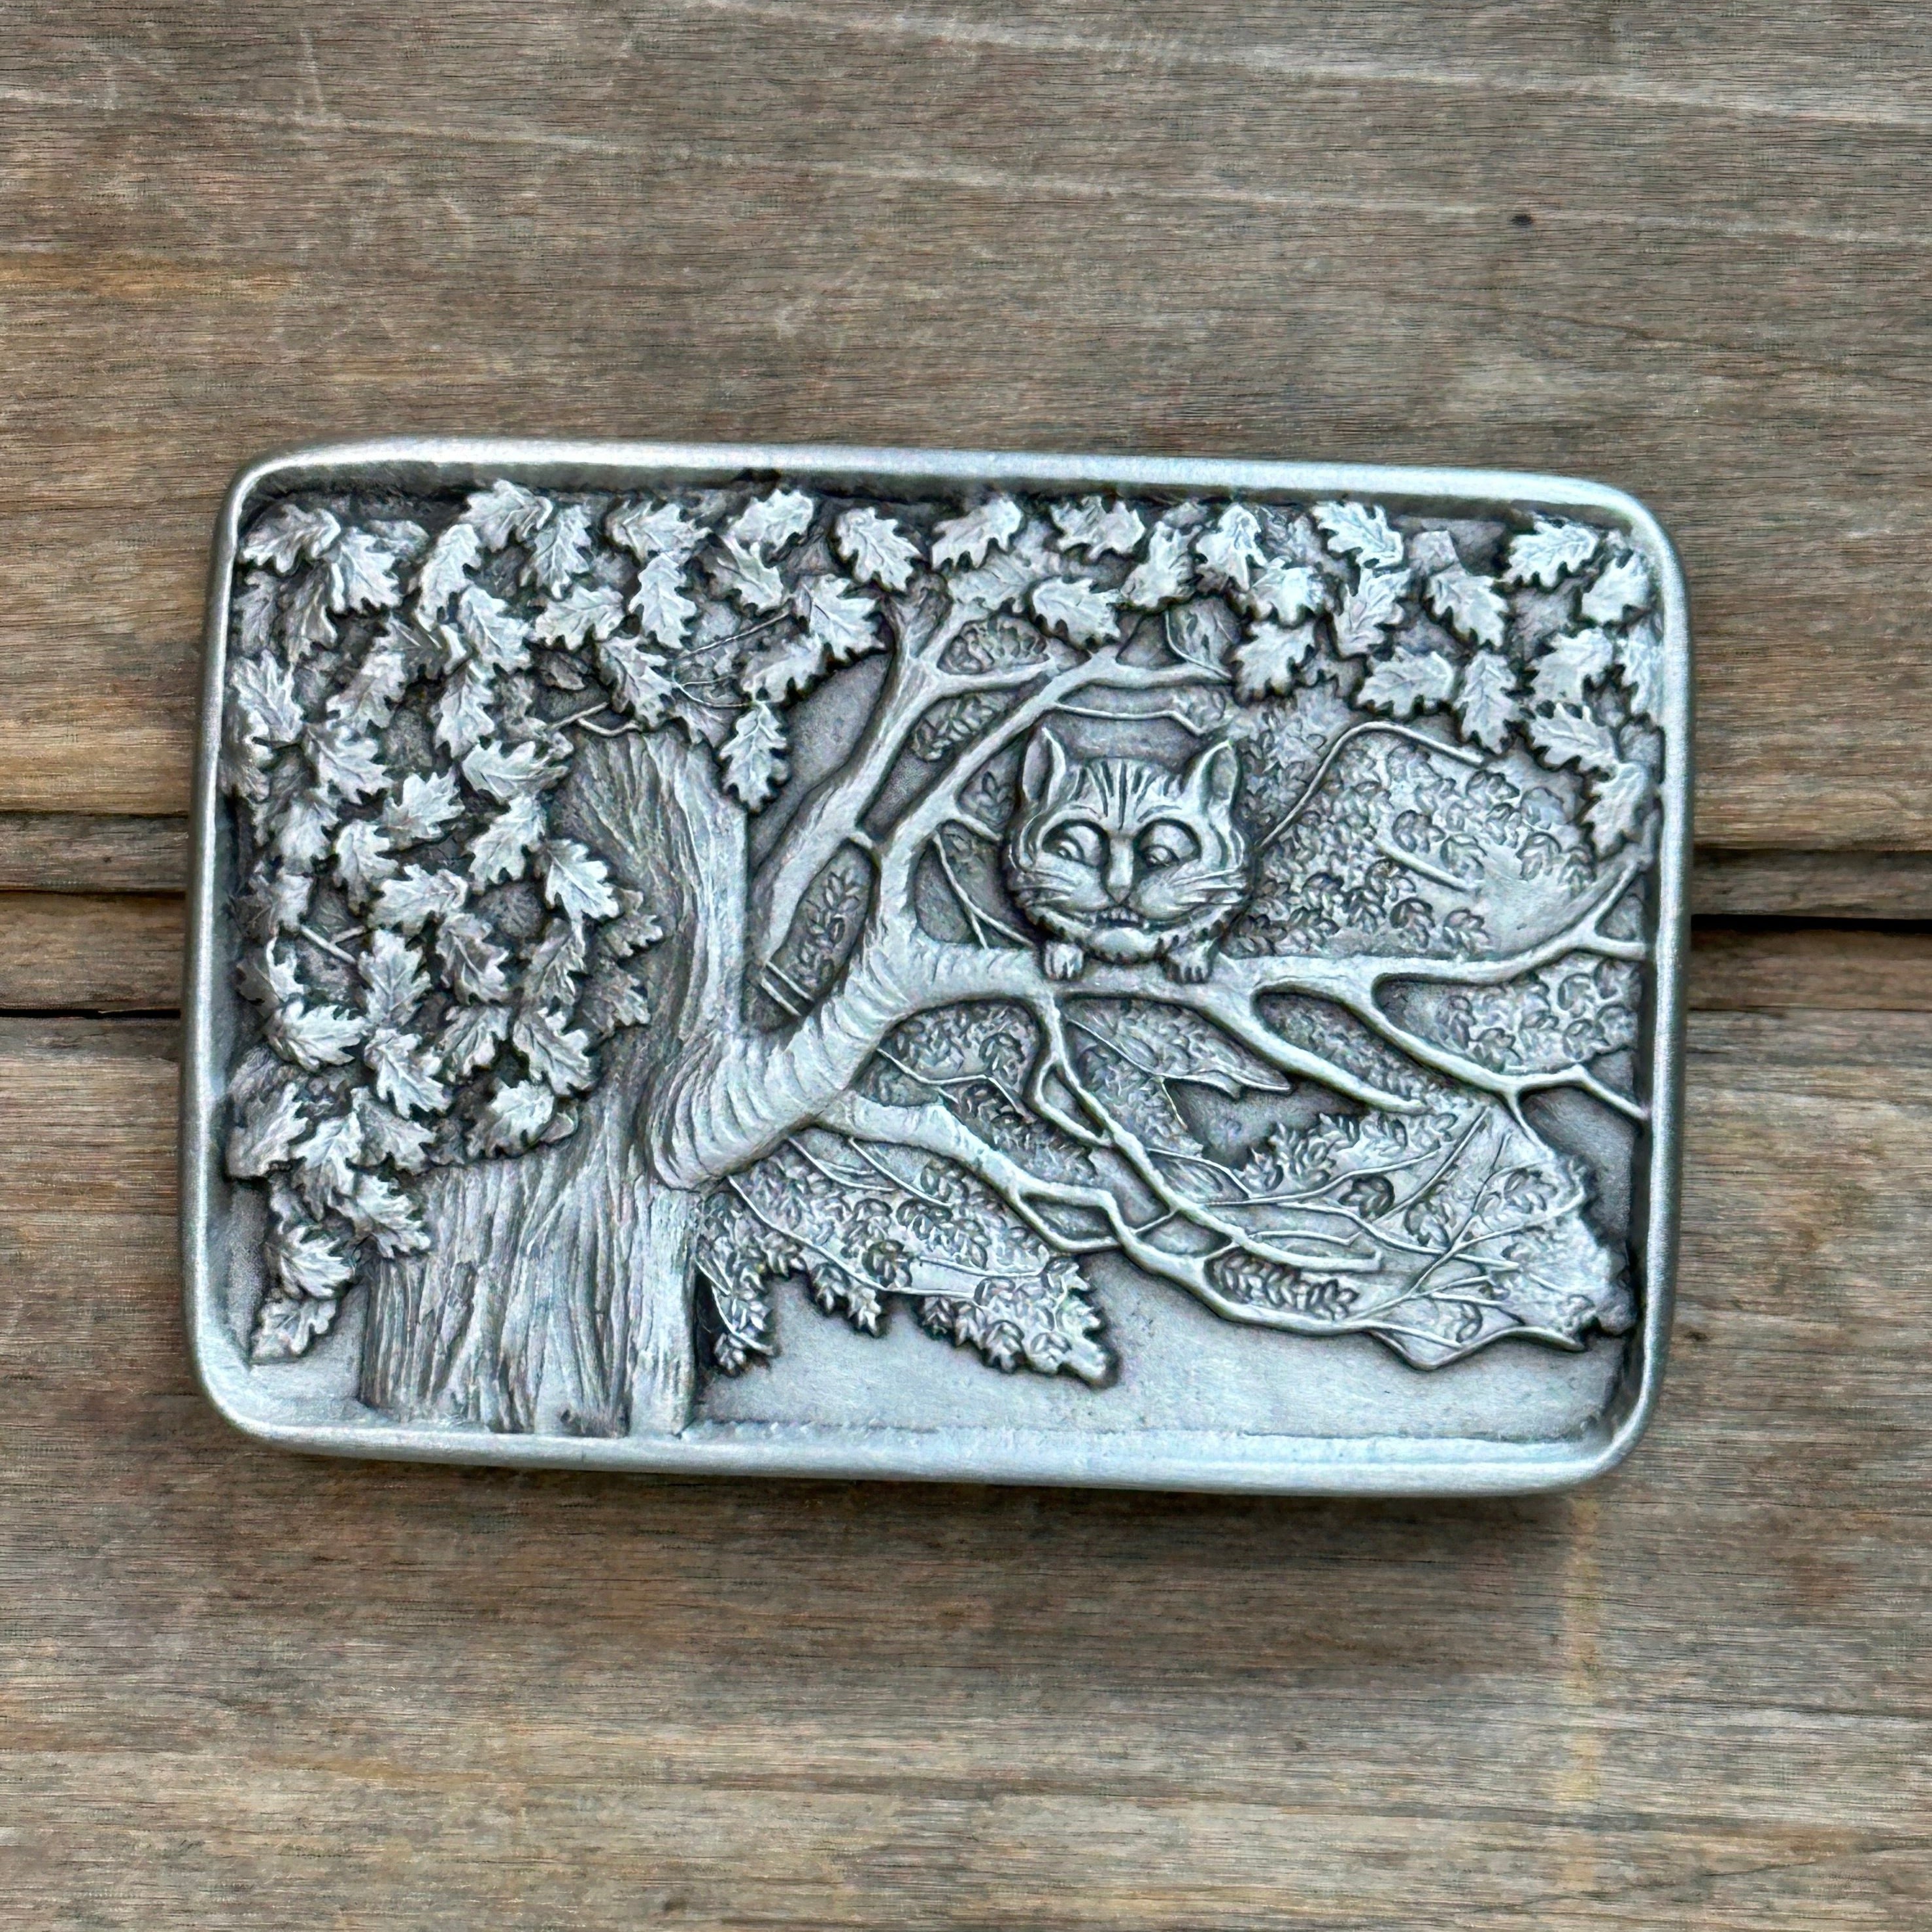 This is a pewter belt buckle with silver tone.   It Depicts the Cheshire Cat, Grinning, Perched in a tree.